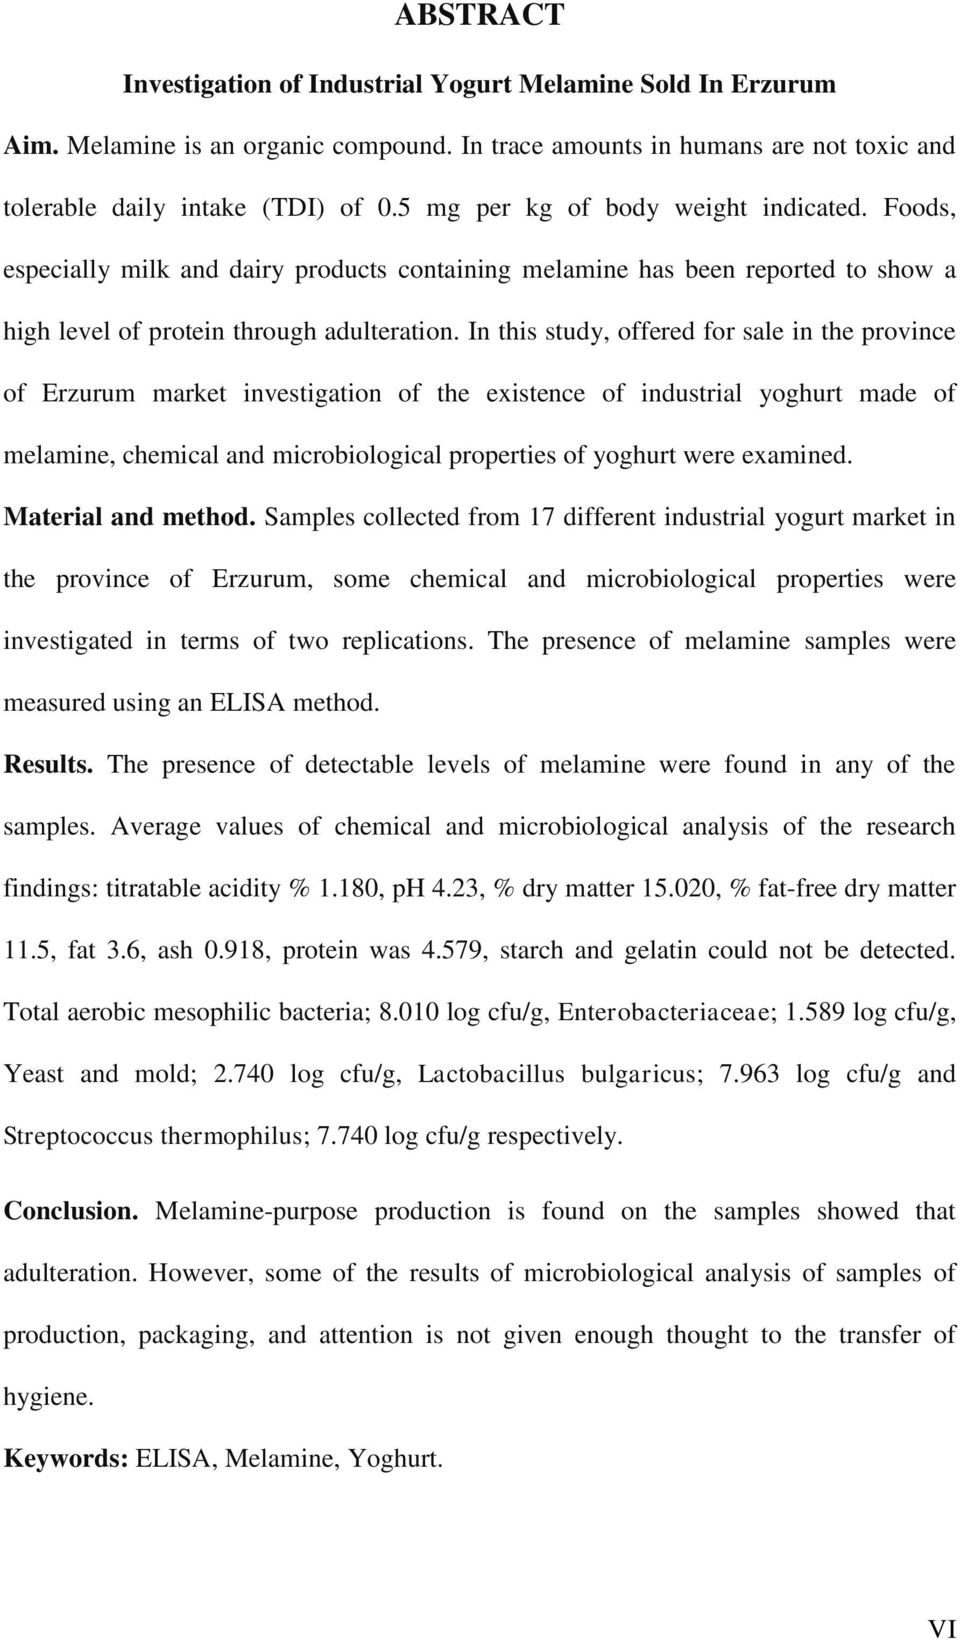 In this study, offered for sale in the province of Erzurum market investigation of the existence of industrial yoghurt made of melamine, chemical and microbiological properties of yoghurt were